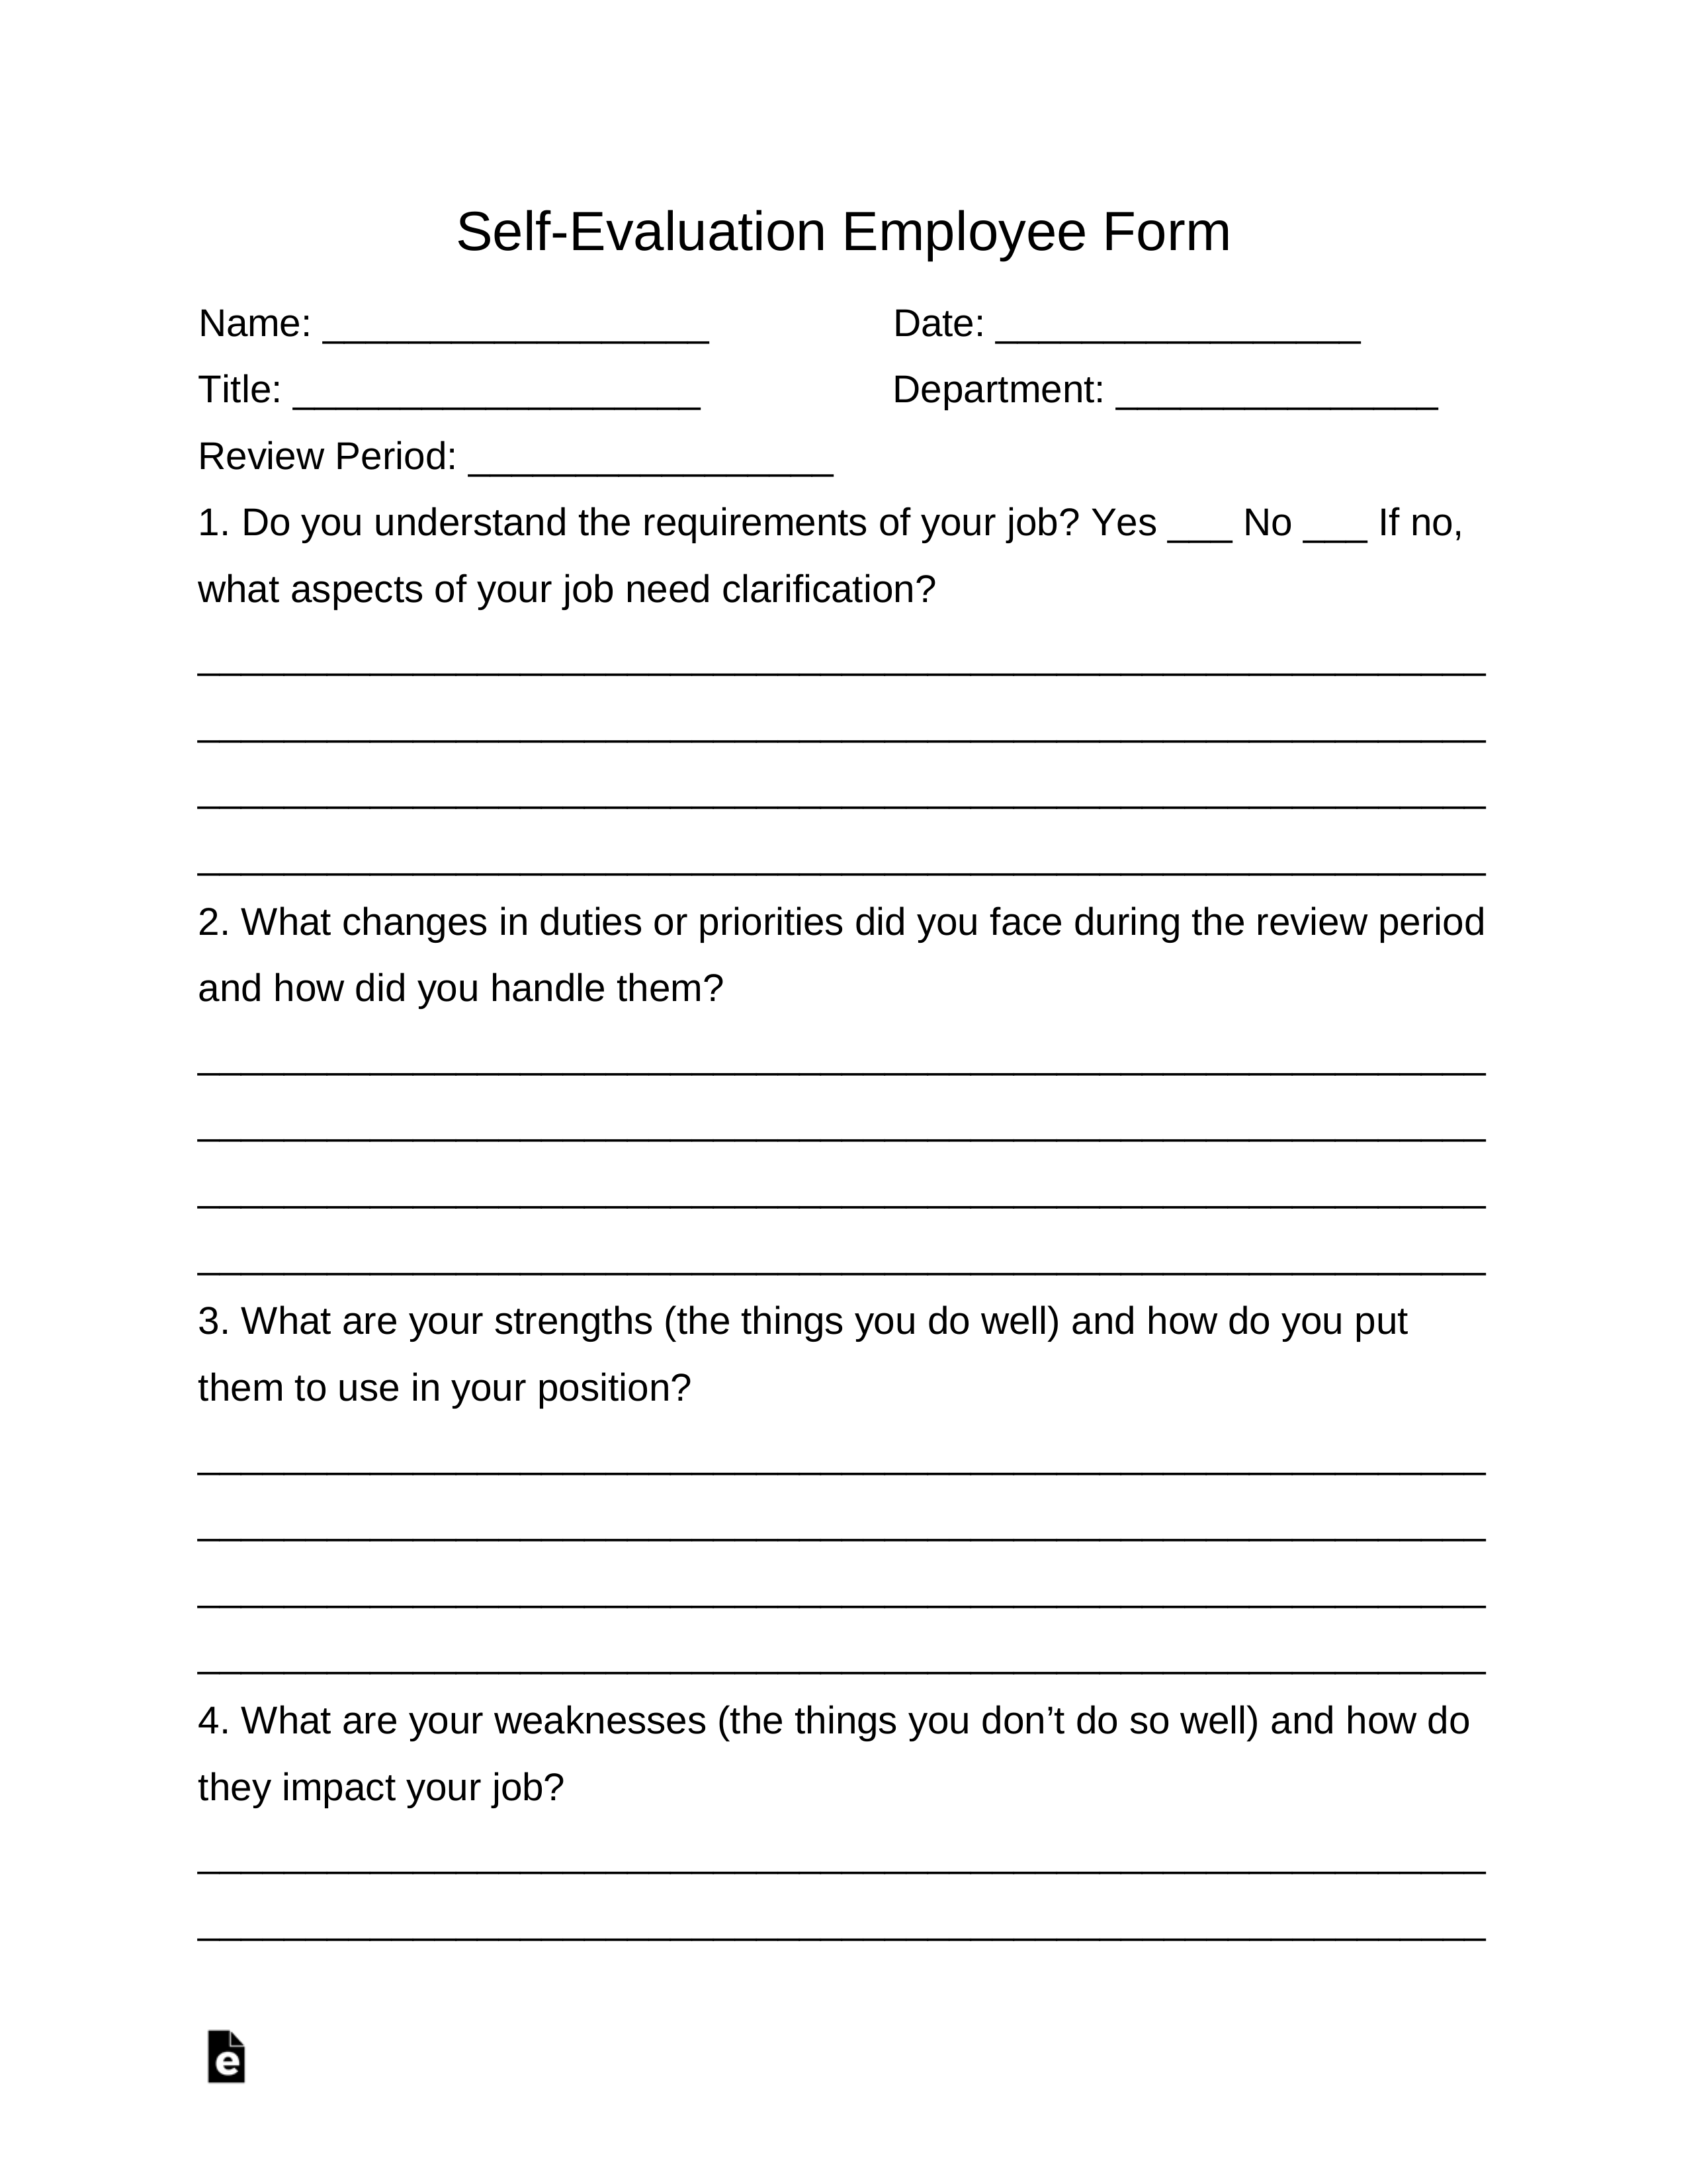 printable-template-employee-evaluation-form-printable-forms-free-online